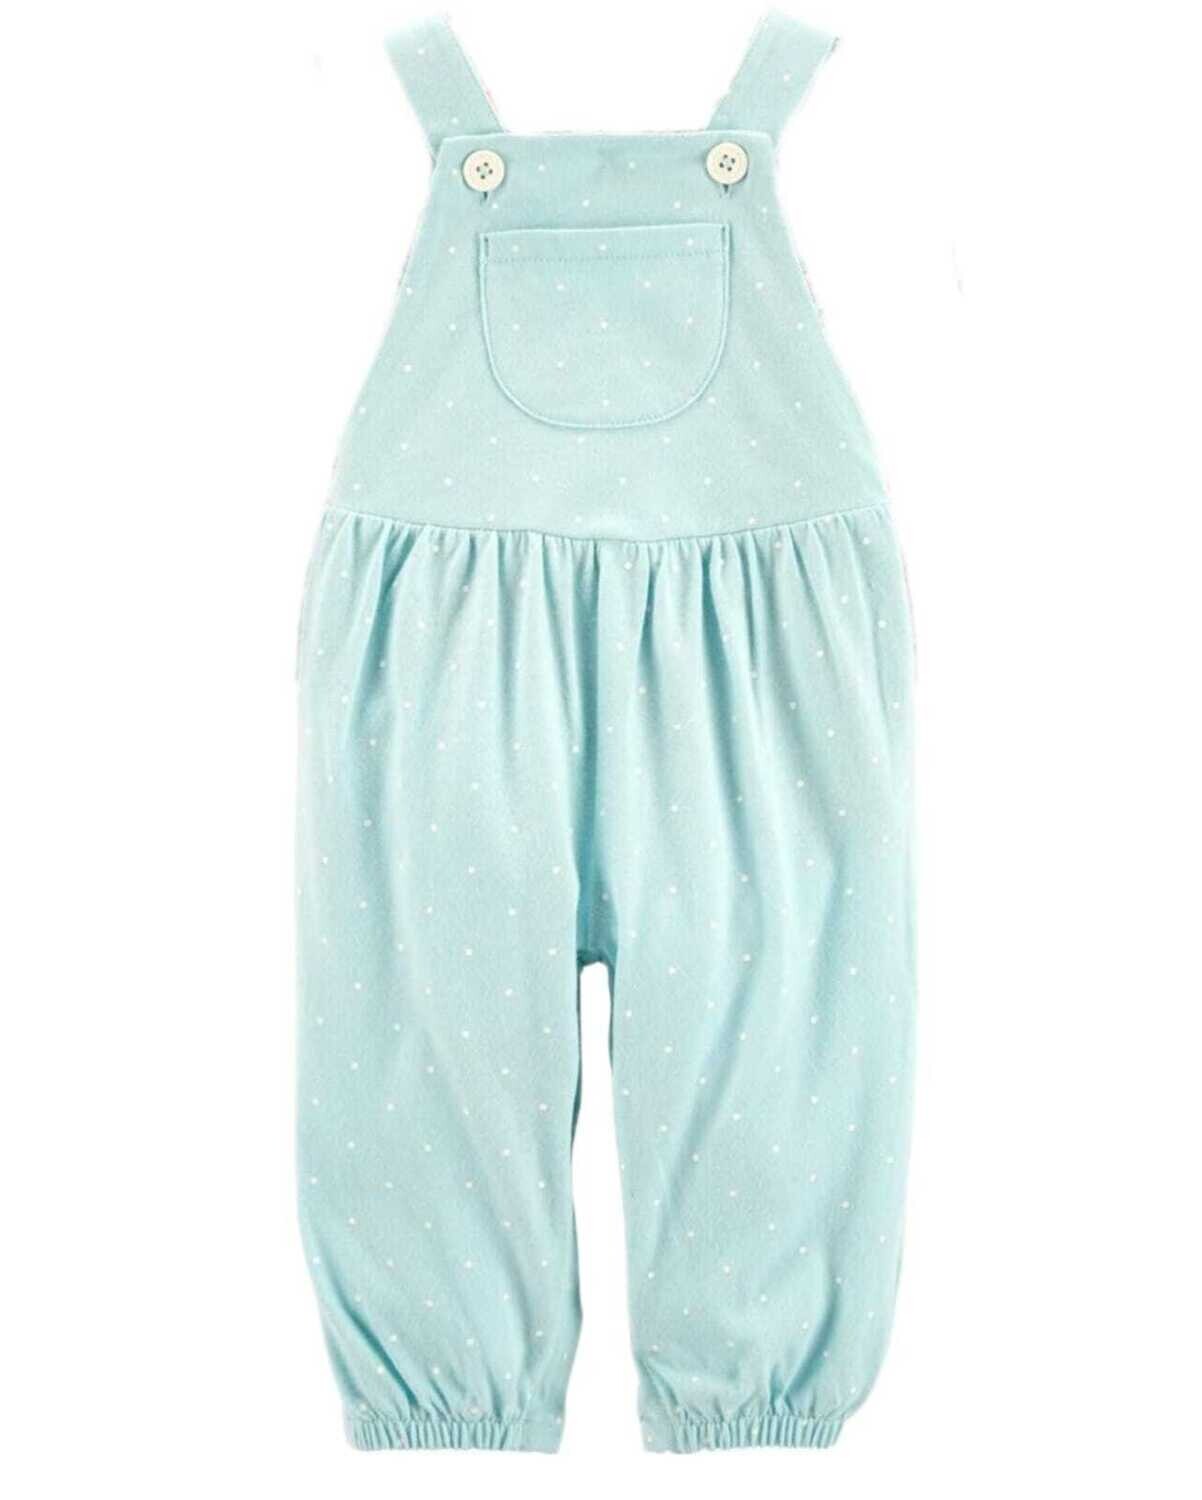 Original Carter's Baby Girl Jumpsuit (New Without Tag)